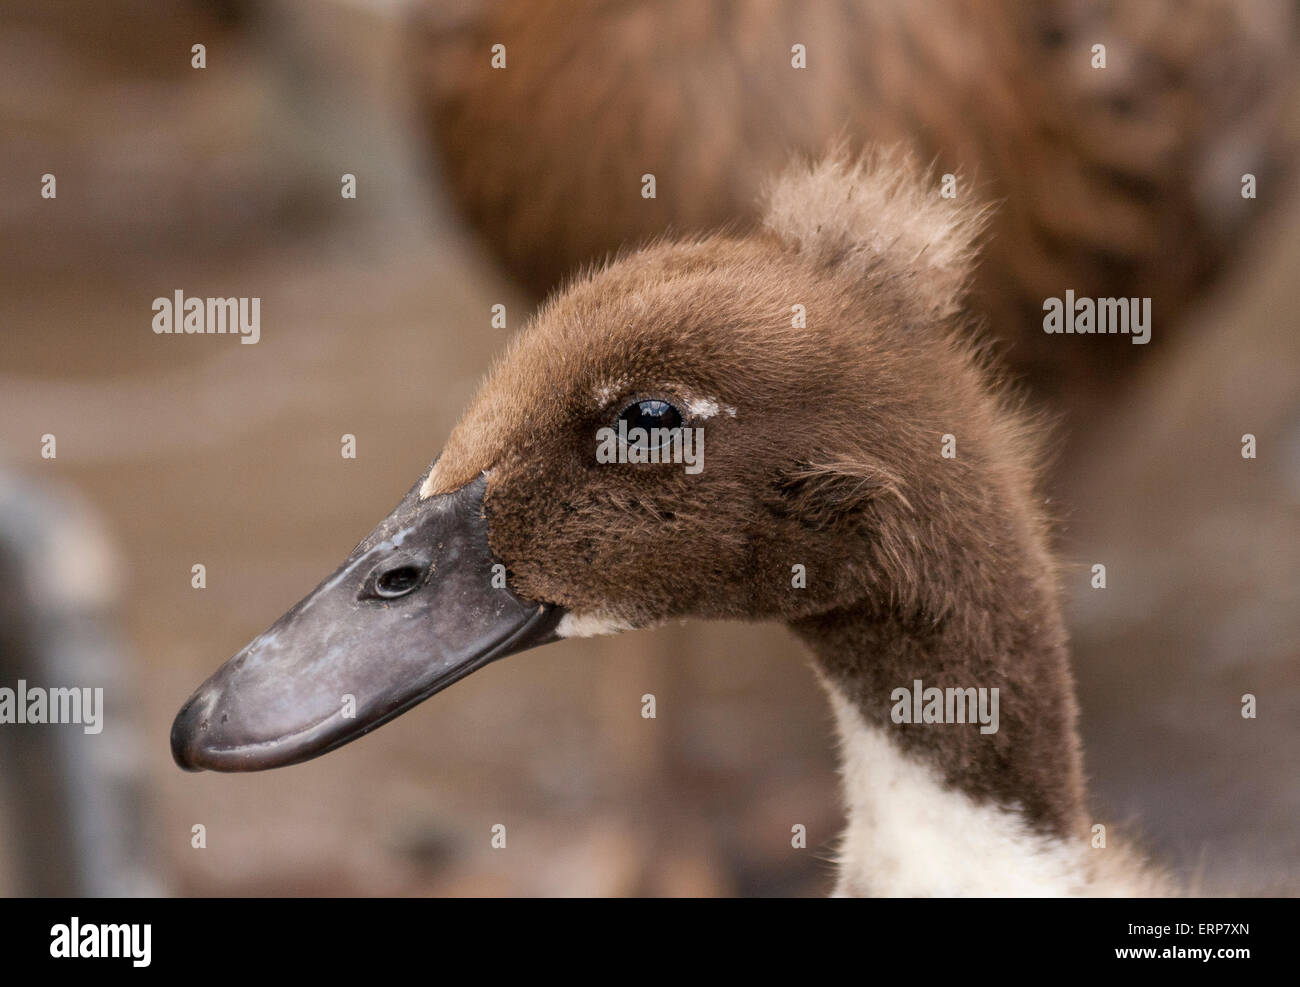 A close-up of the head of a female Hybrid Mallard duck which is Brown and White with down feathers on the top of it's head. Stock Photo